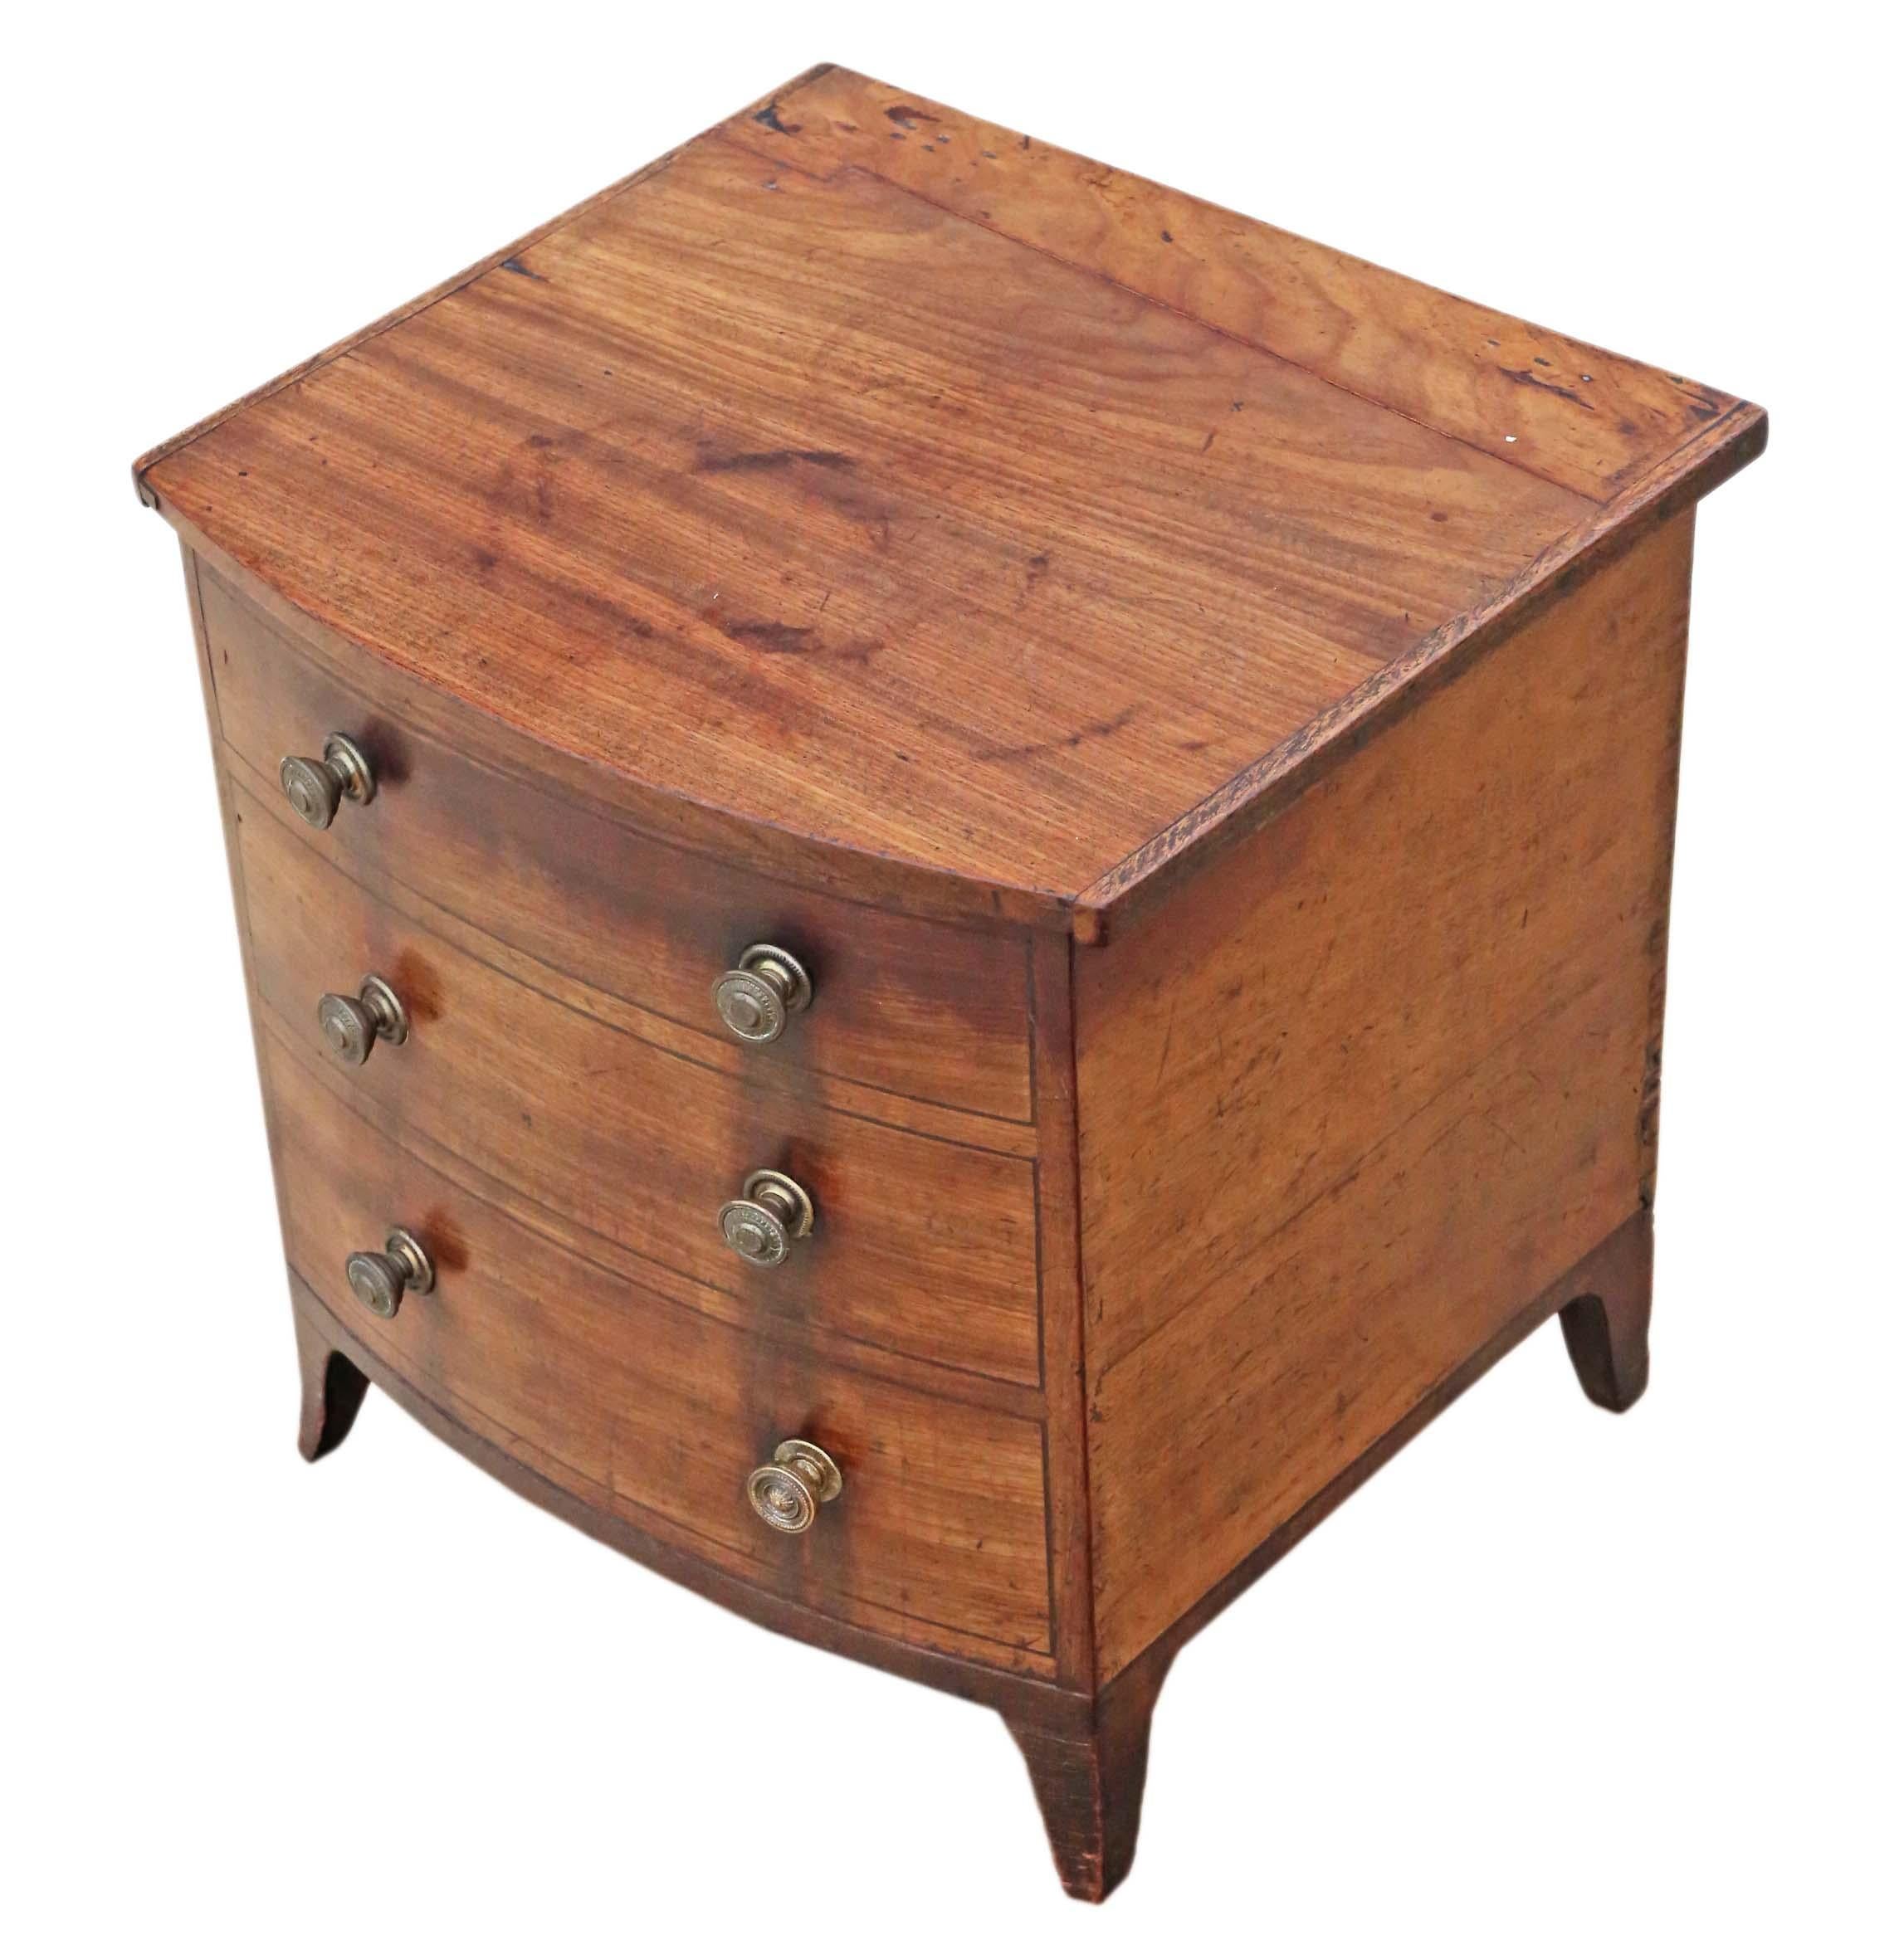 Wood Victorian Mahogany Coal Scuttle Box or Cabinet, 19th Century